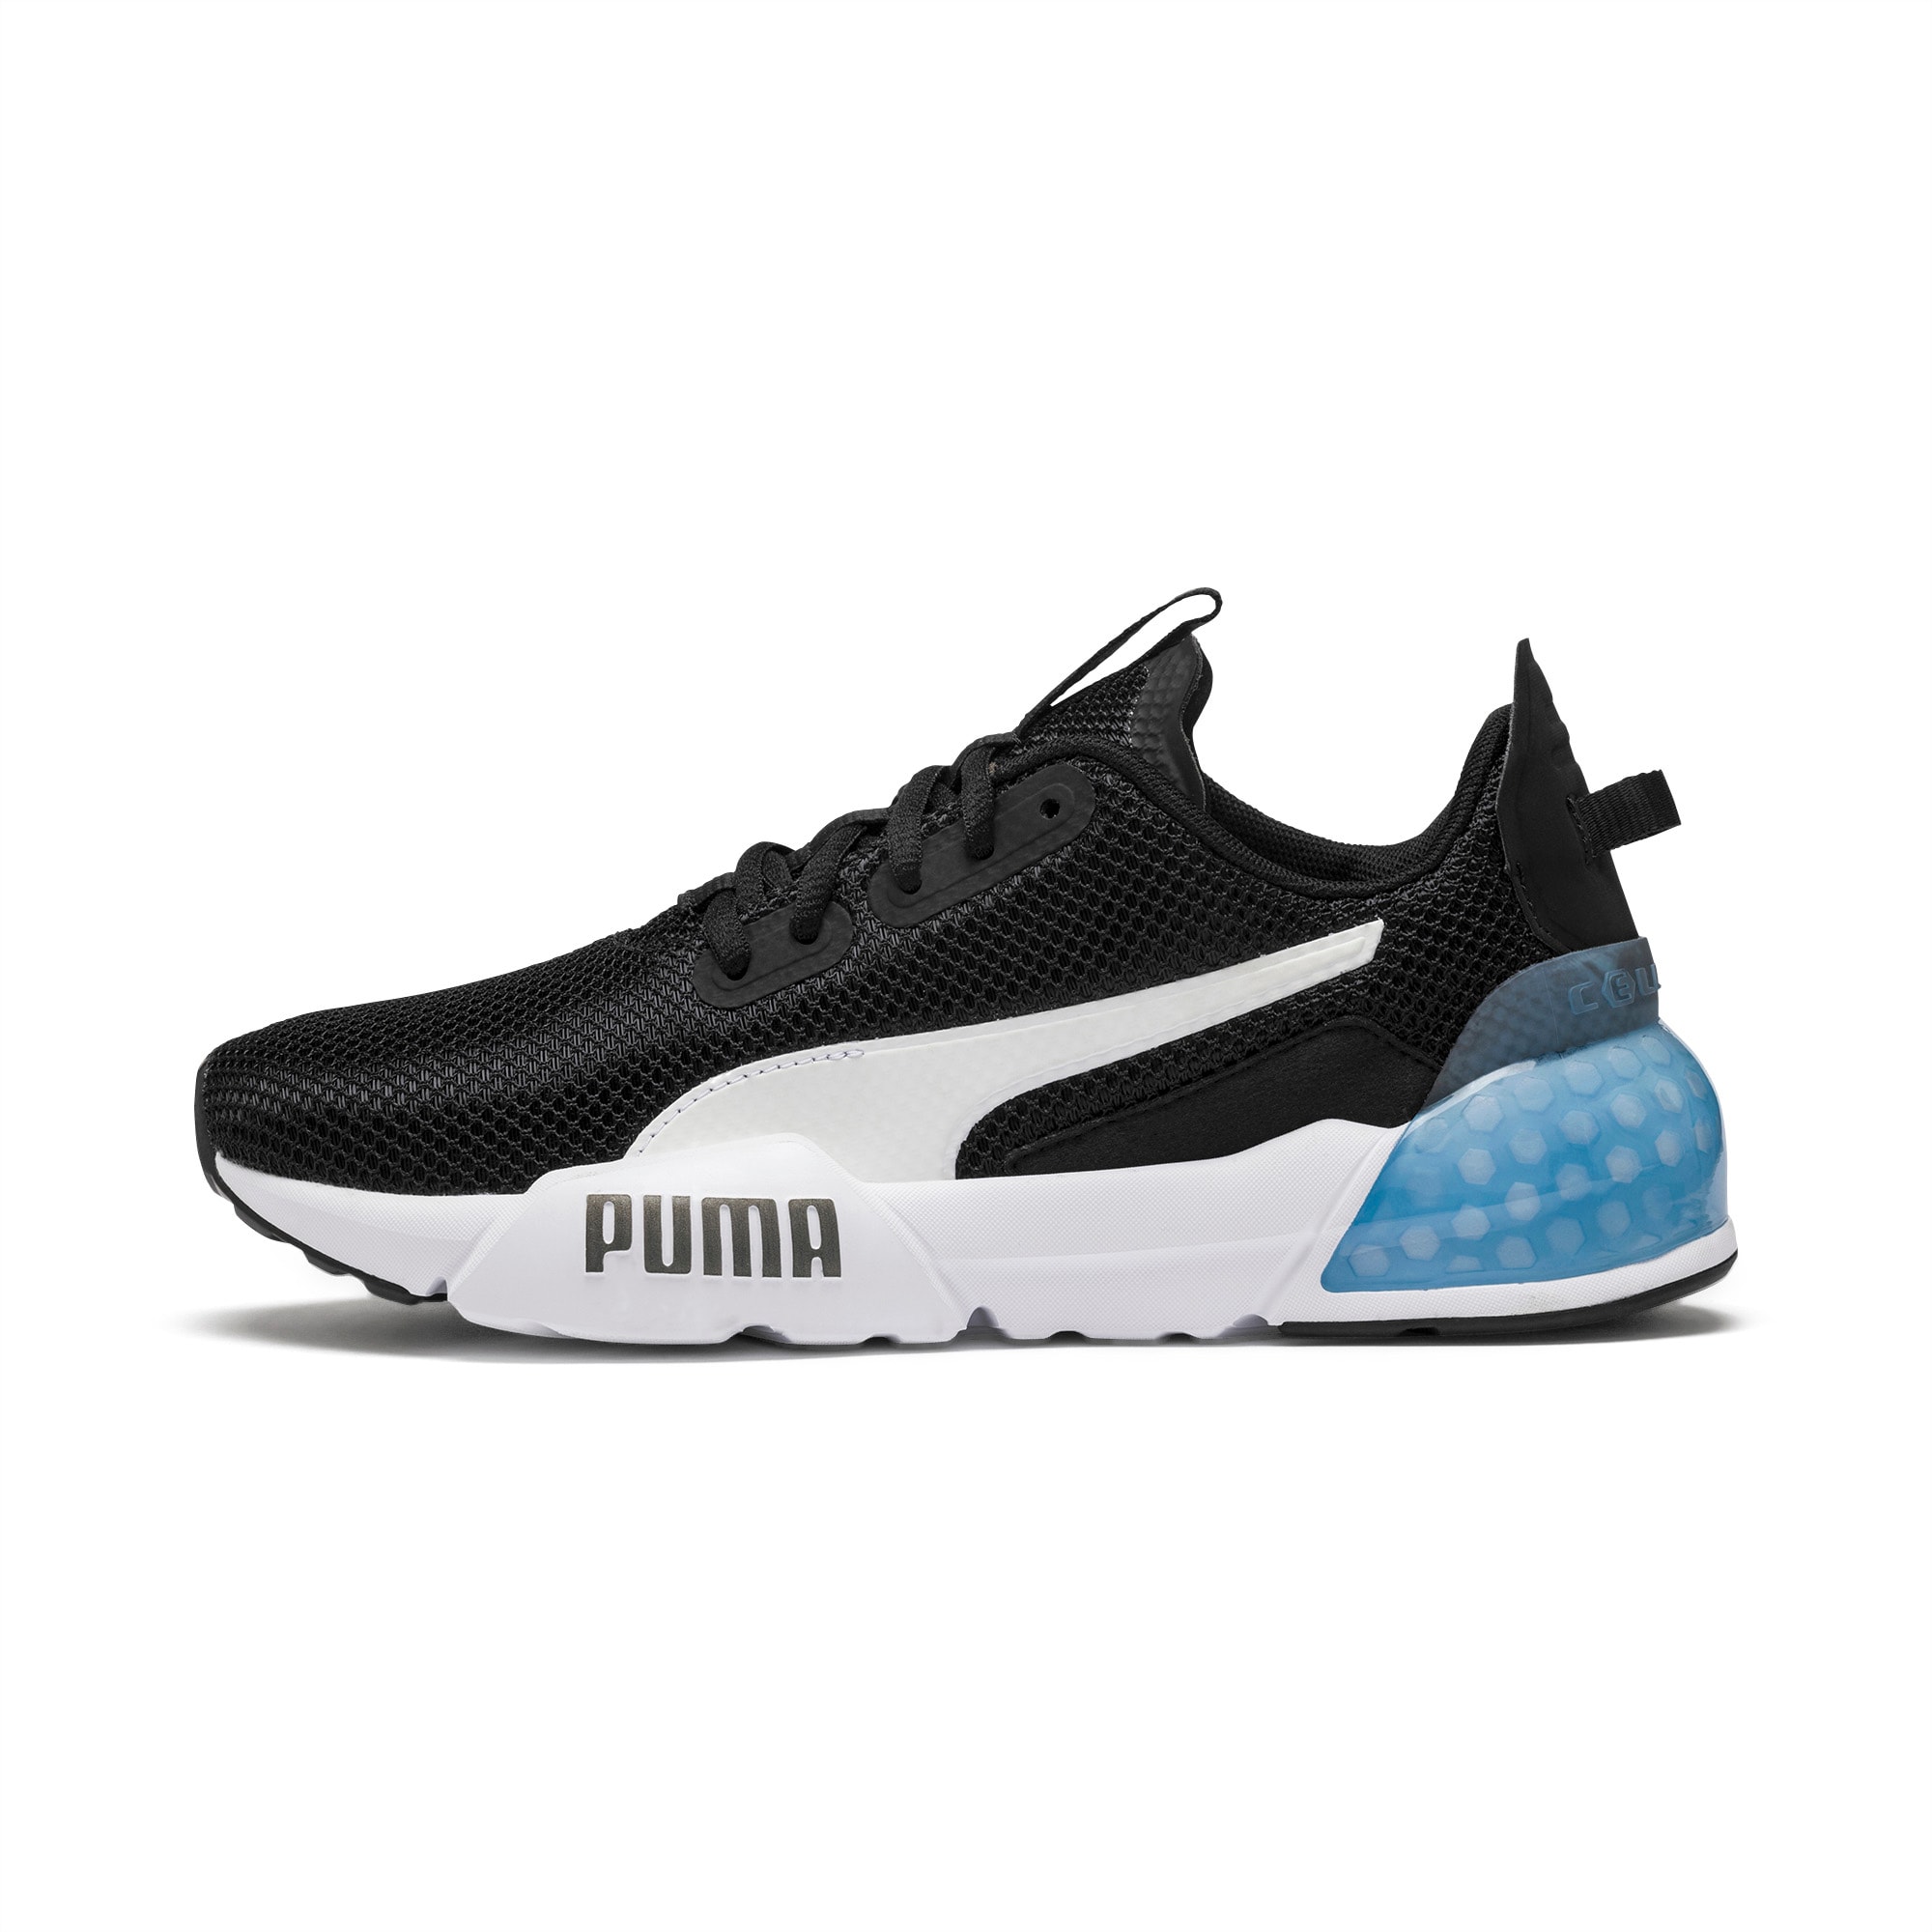 puma idcell shoes